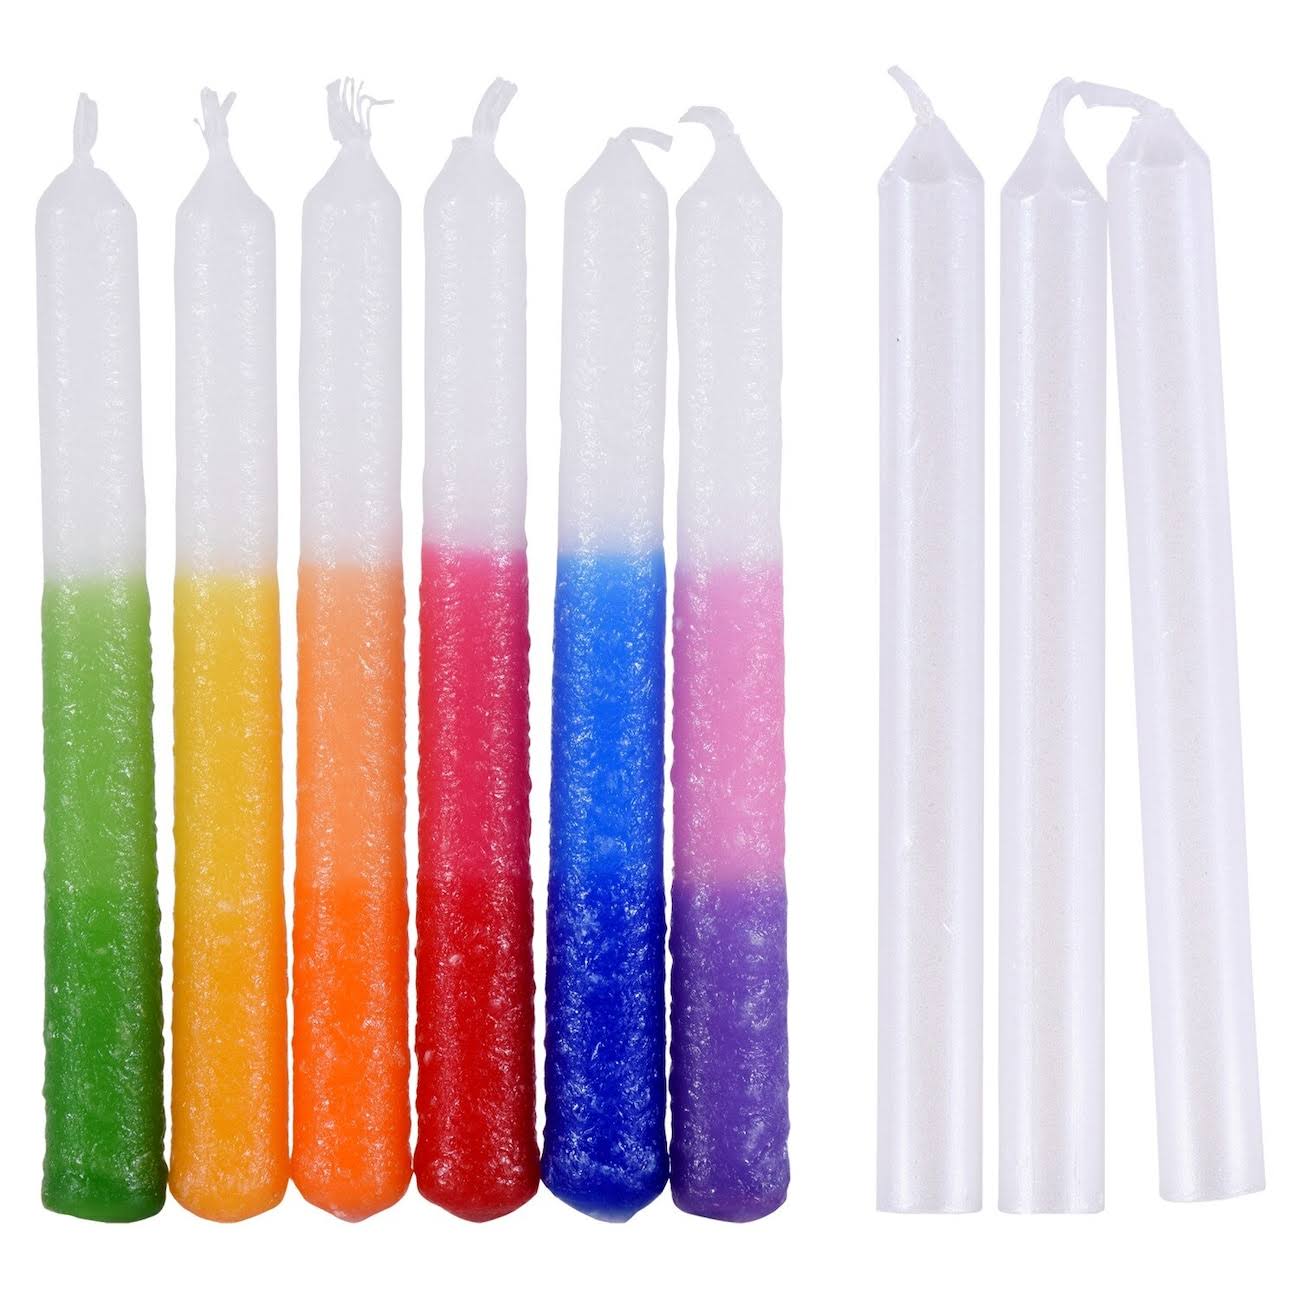 48 Colorful Party Candles, 8-Ct. Packs at Dollar Tree